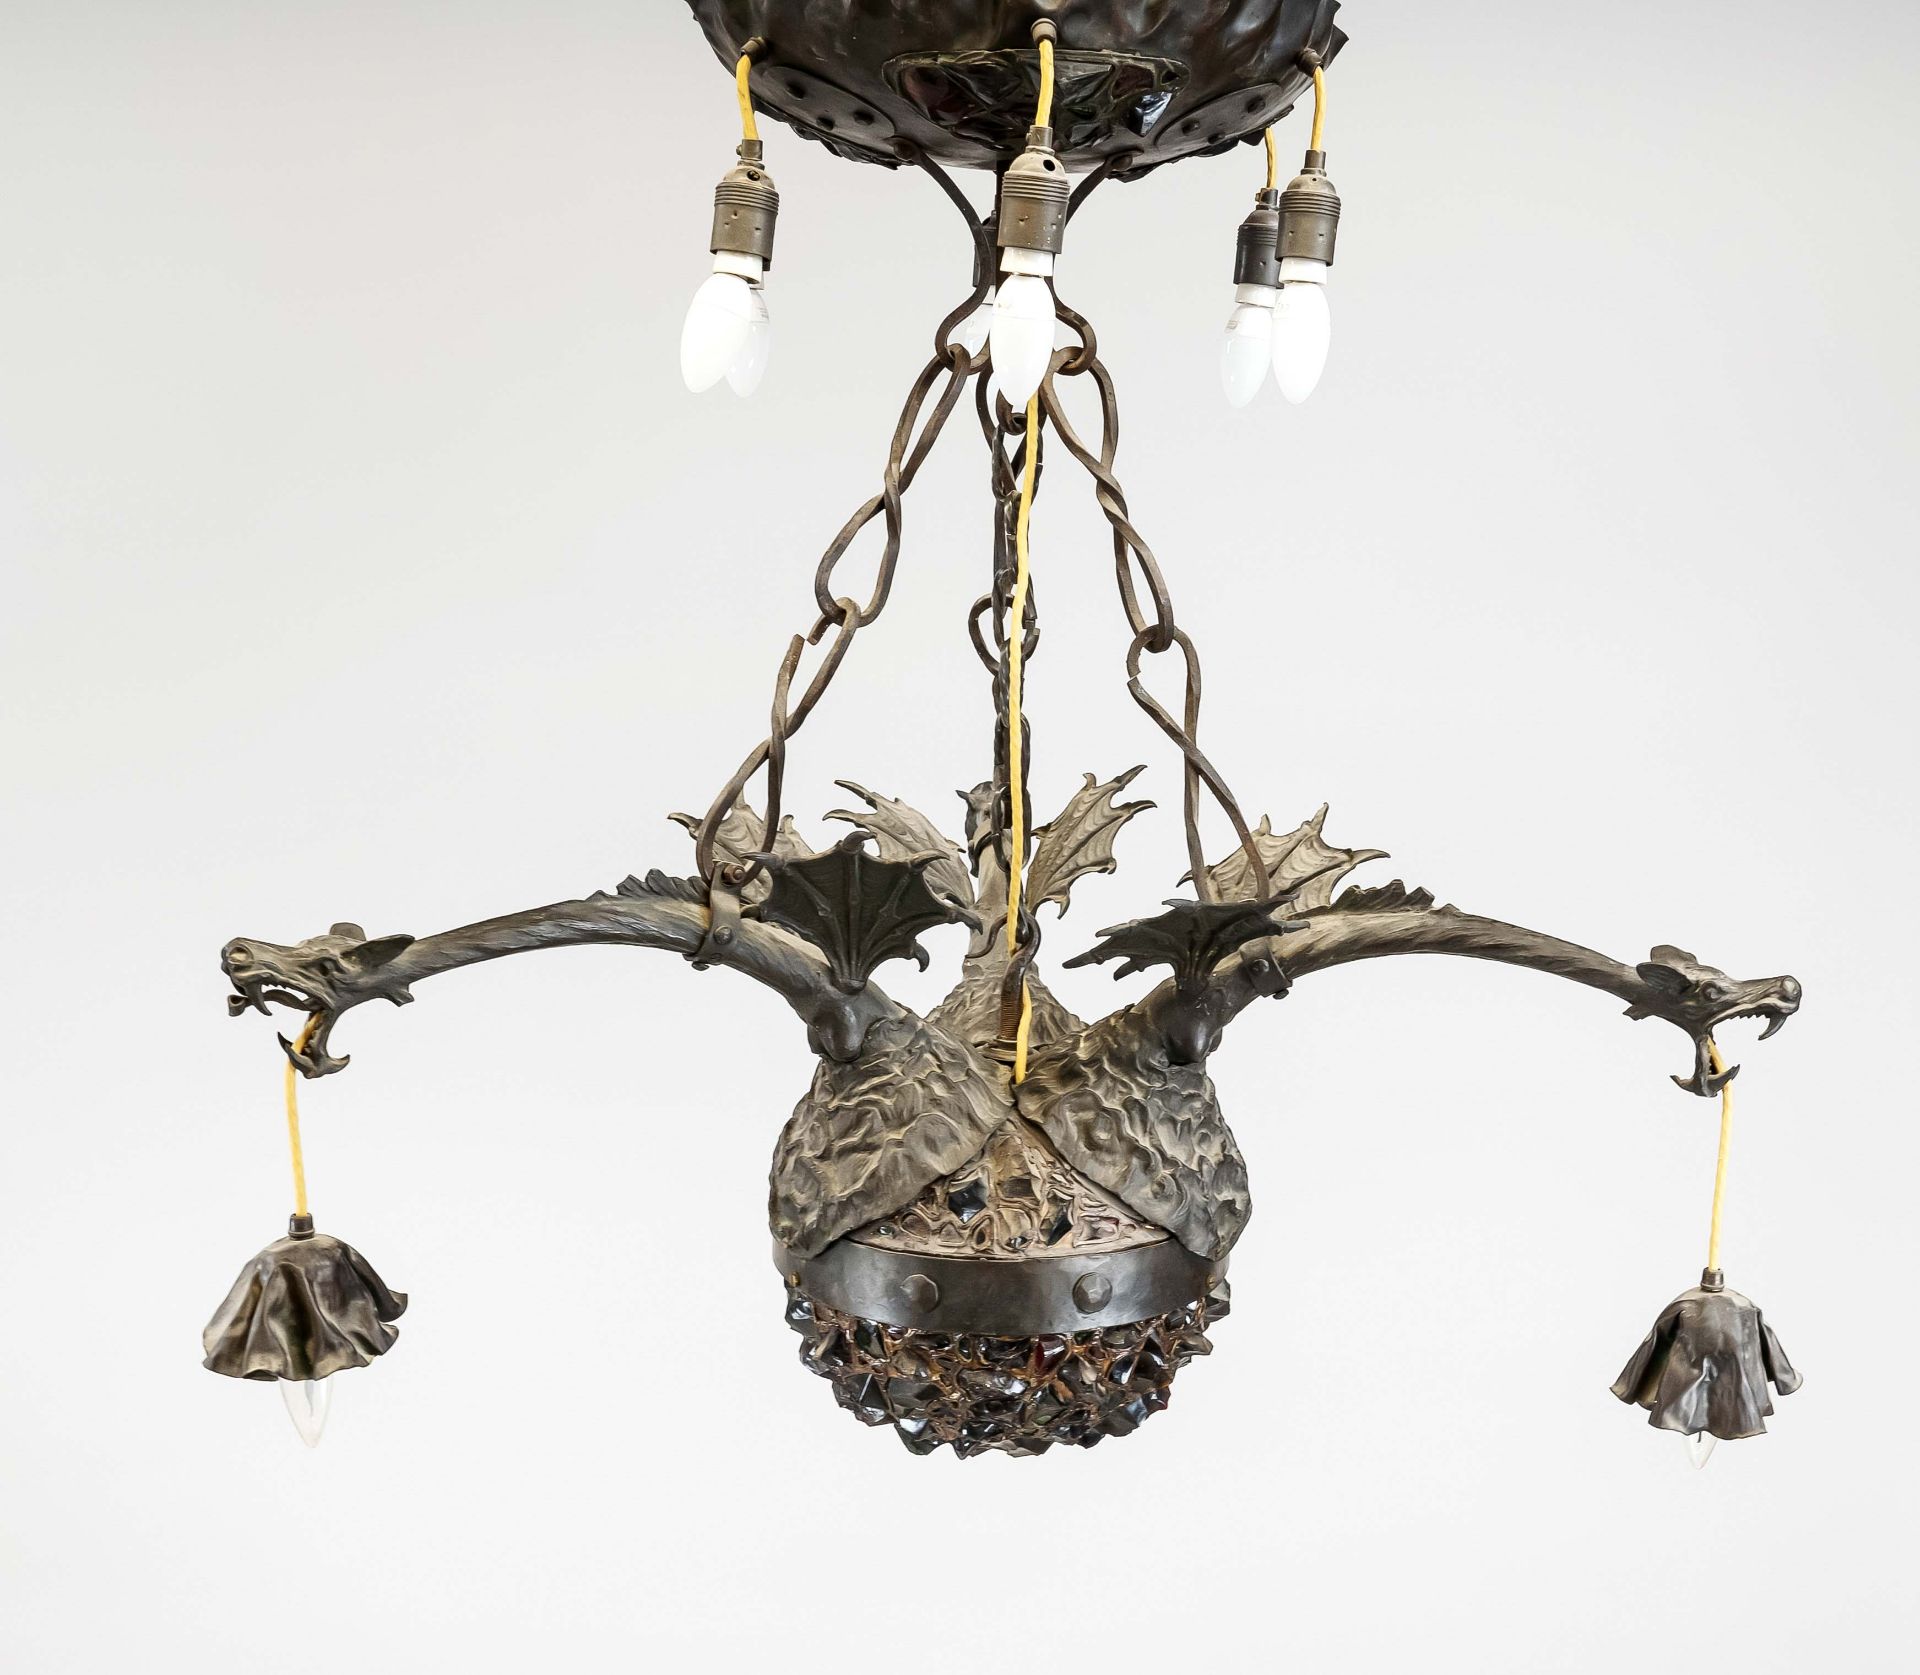 Large dragon lamp with humped glass, c. 1900. Large humped glass globe with wide band with rivets.